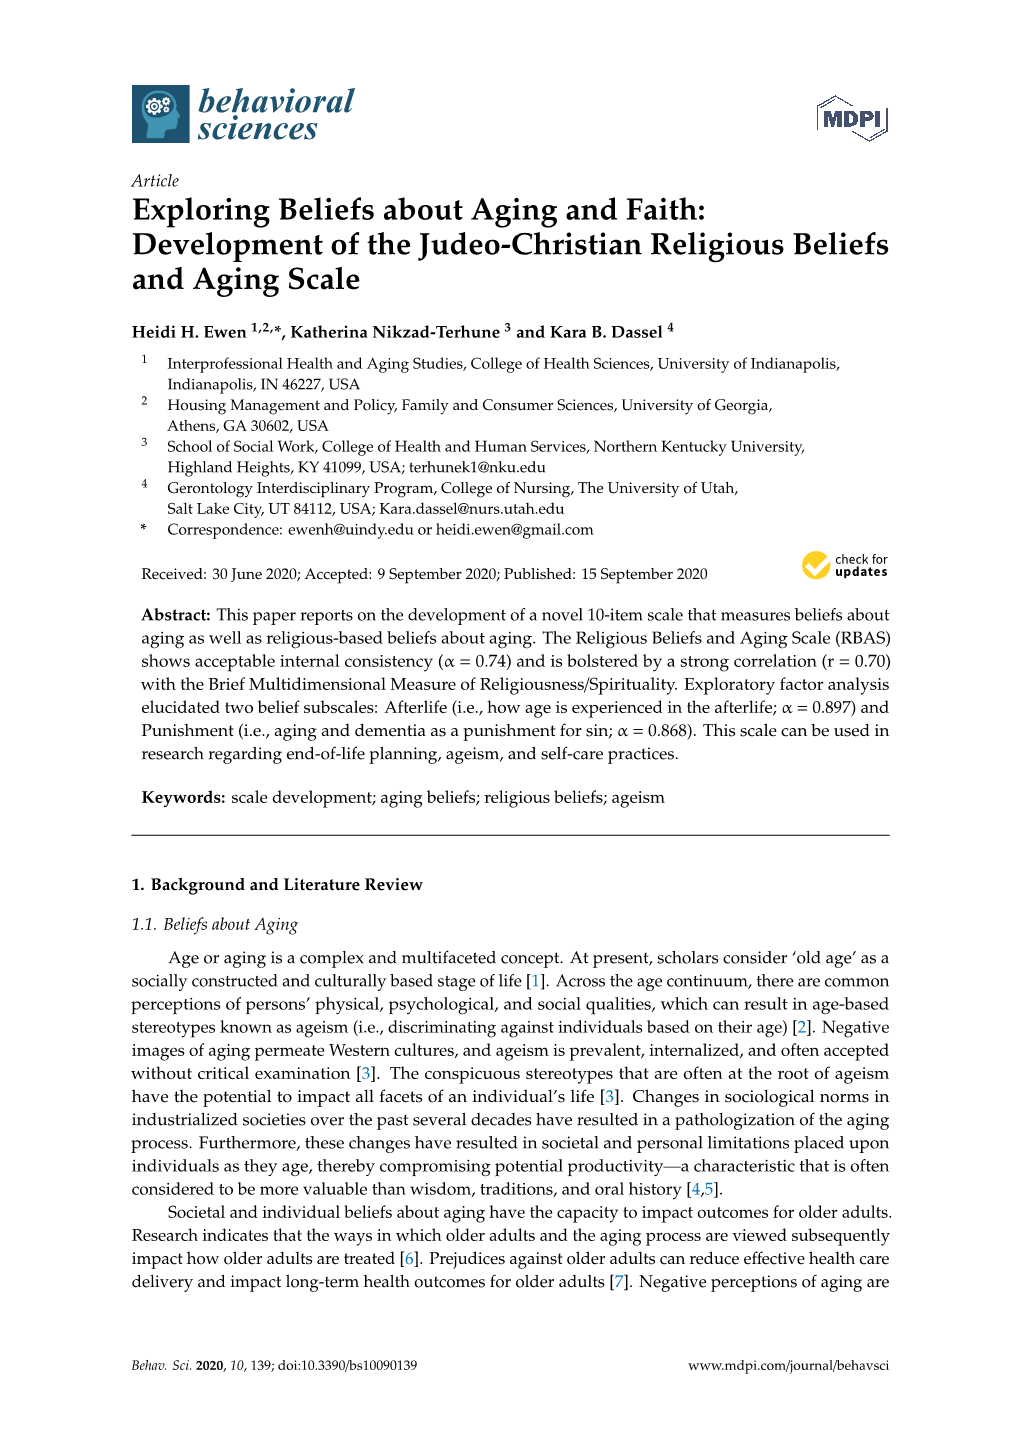 Development of the Judeo-Christian Religious Beliefs and Aging Scale